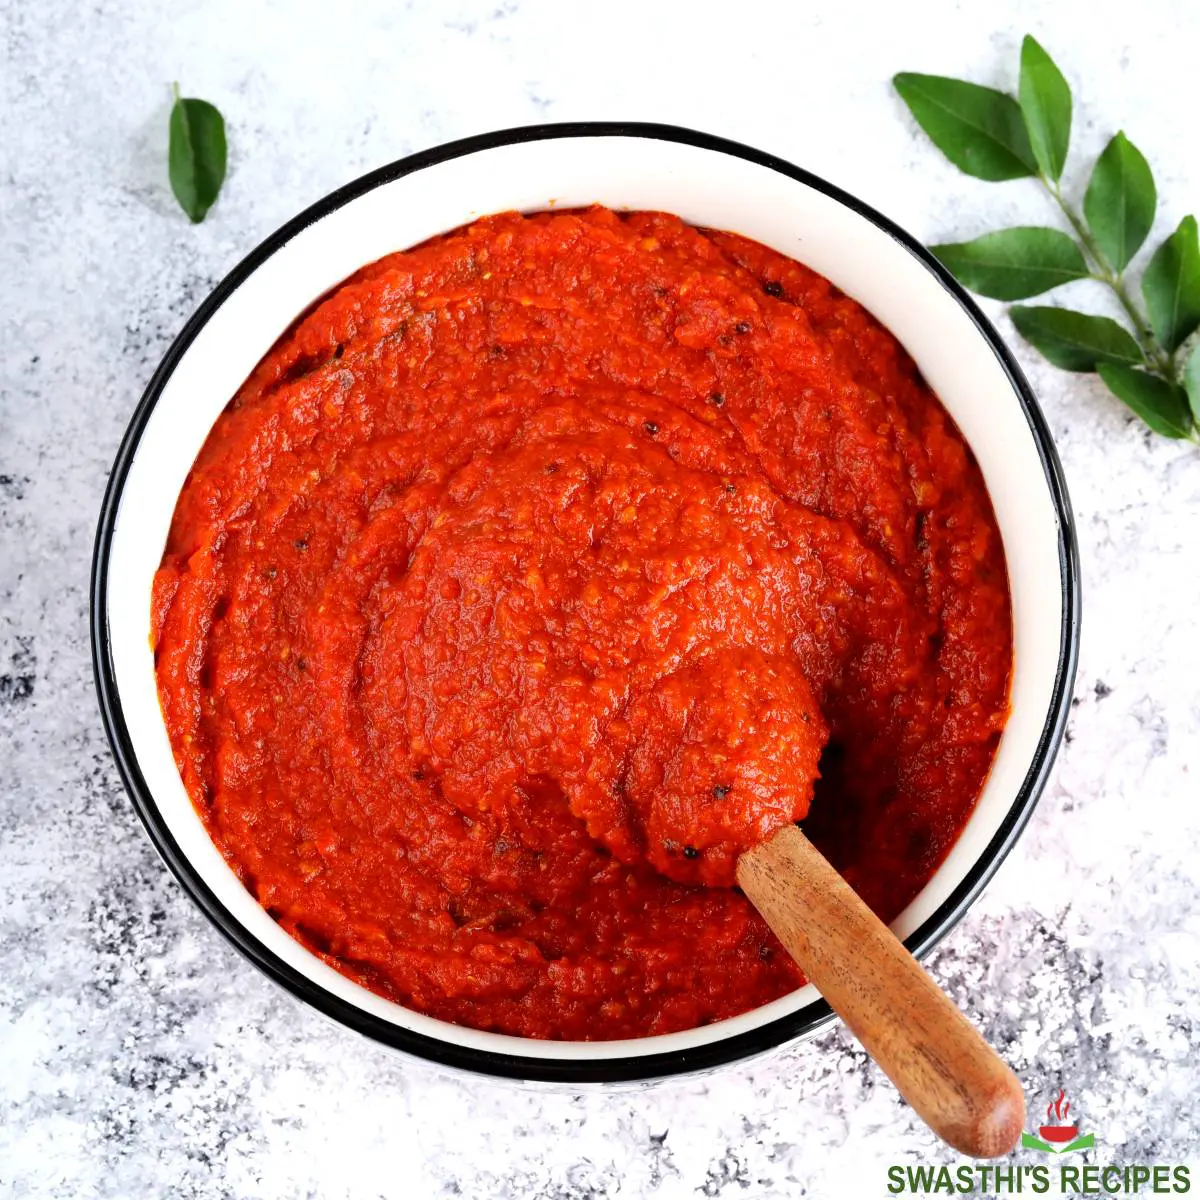 Tomato Chutney made with tomatoes, spices and herbs